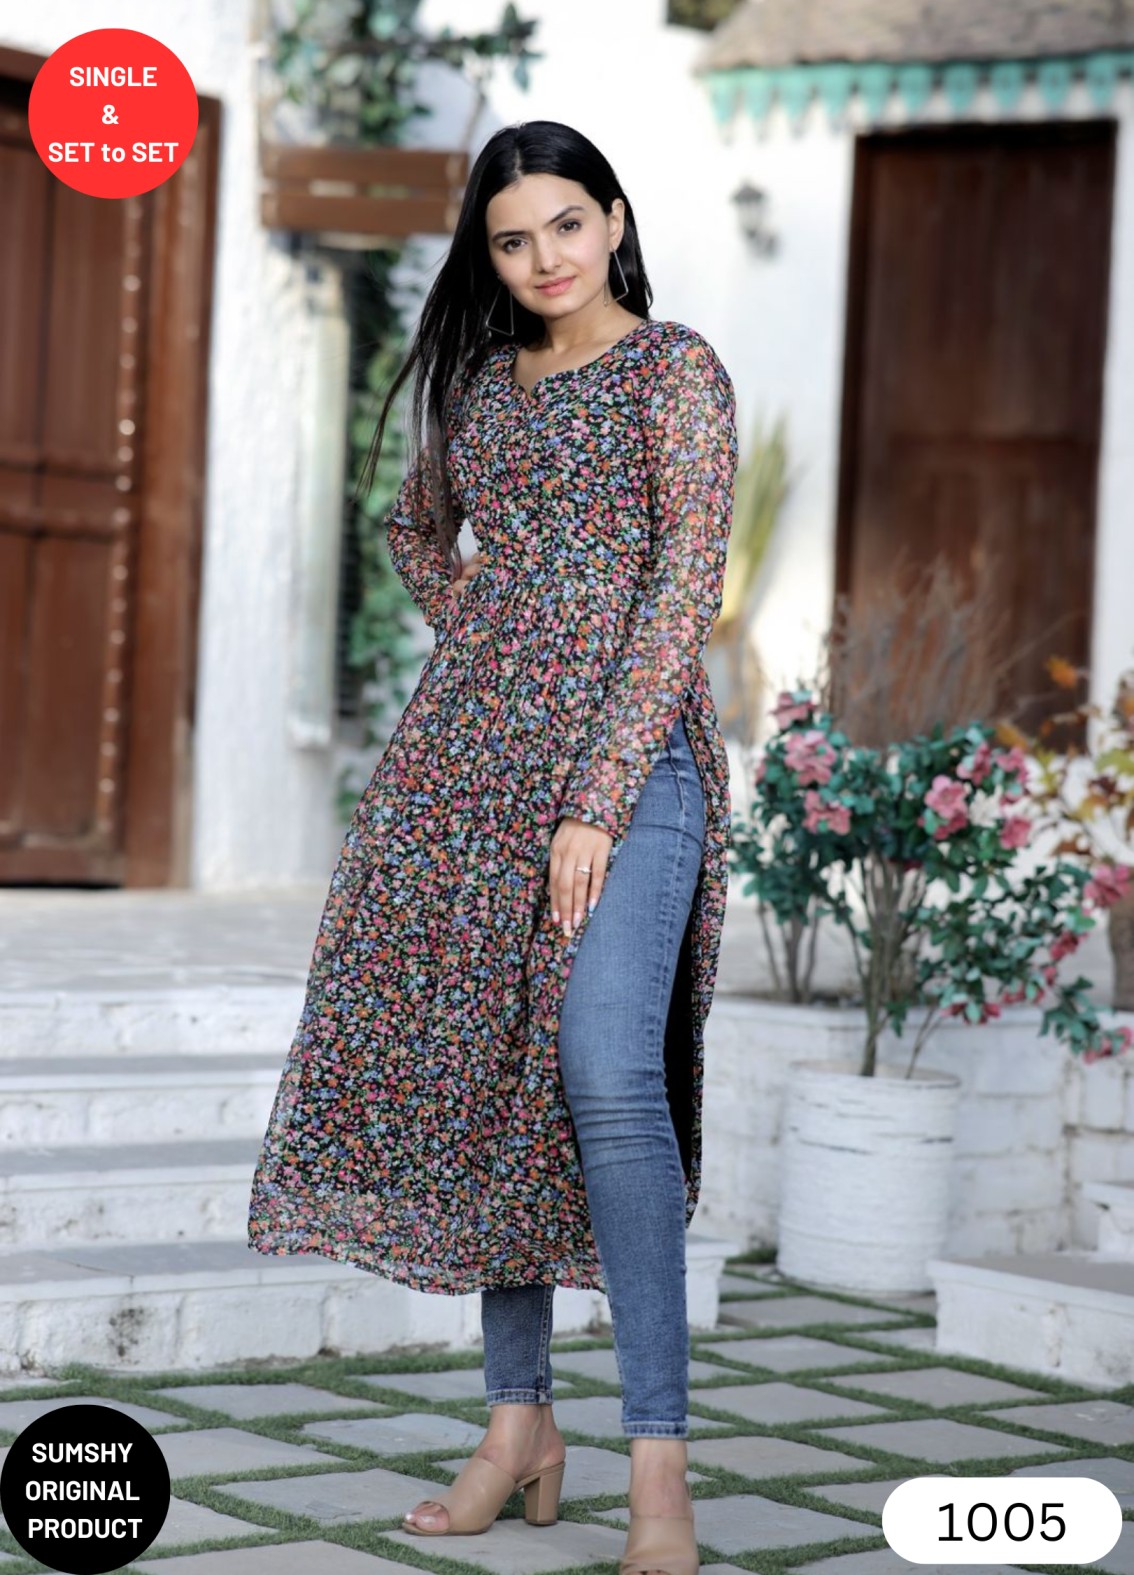 Sea Green Fabclub Cotton Floral Printed Flared & Front Slit Women Kurti at  Rs 379 | Party Wear Kurtas in Ahmedabad | ID: 23989338191